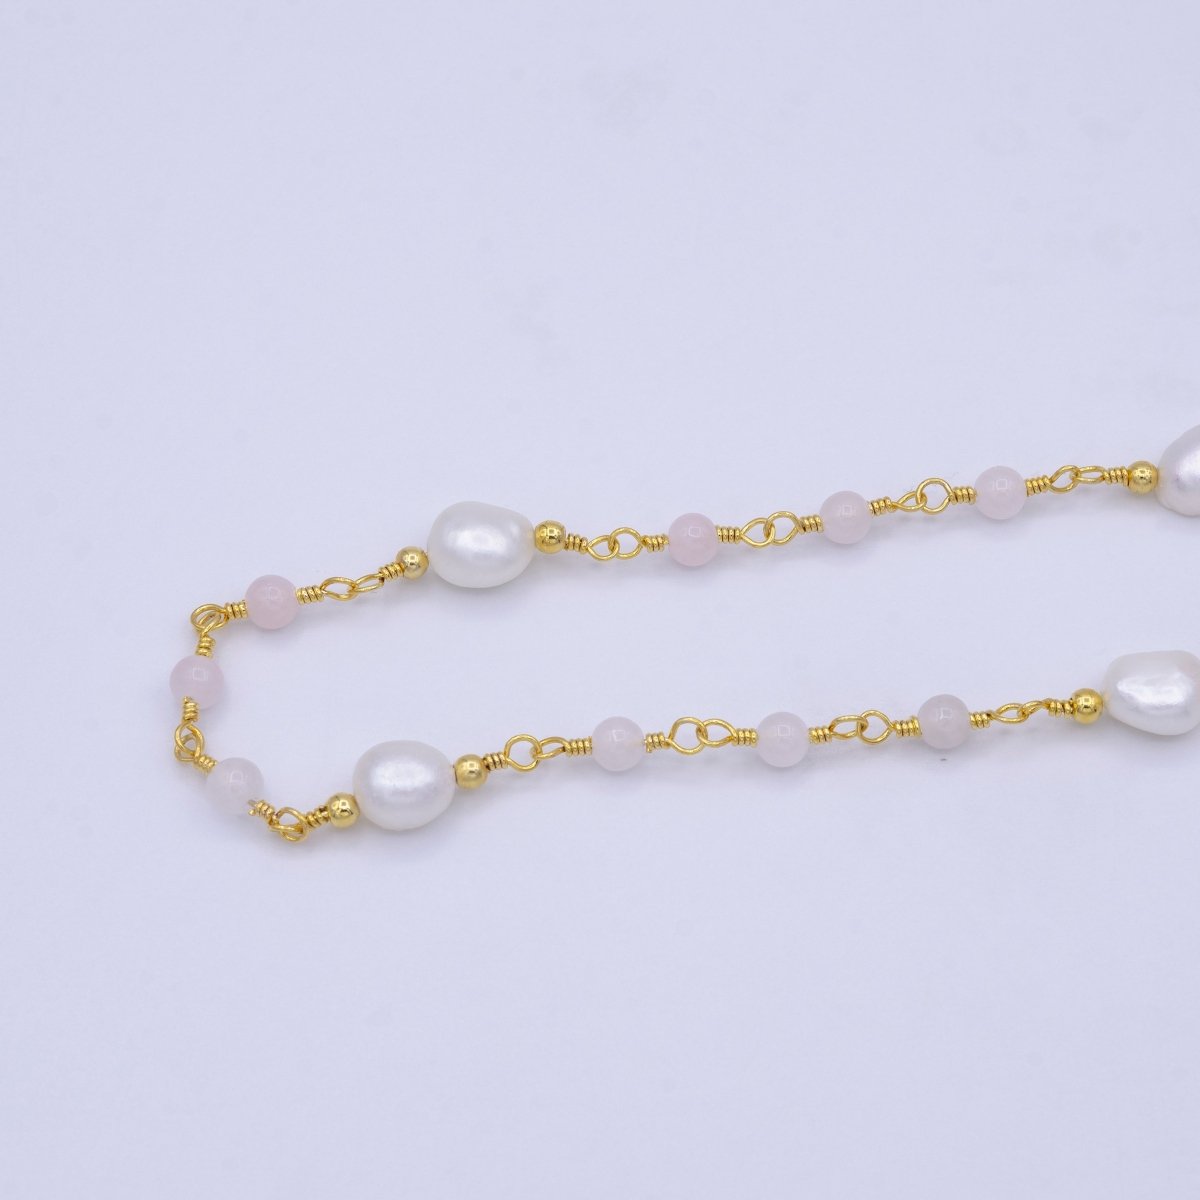 14K Gold Filled Pearl Chain, White Freshwater Pearl Rosary Chain, Bulk Chain Rose Quartz Beads Beaded Unfinished Chain by Yard | ROLL-1213 Clearance Pricing - DLUXCA